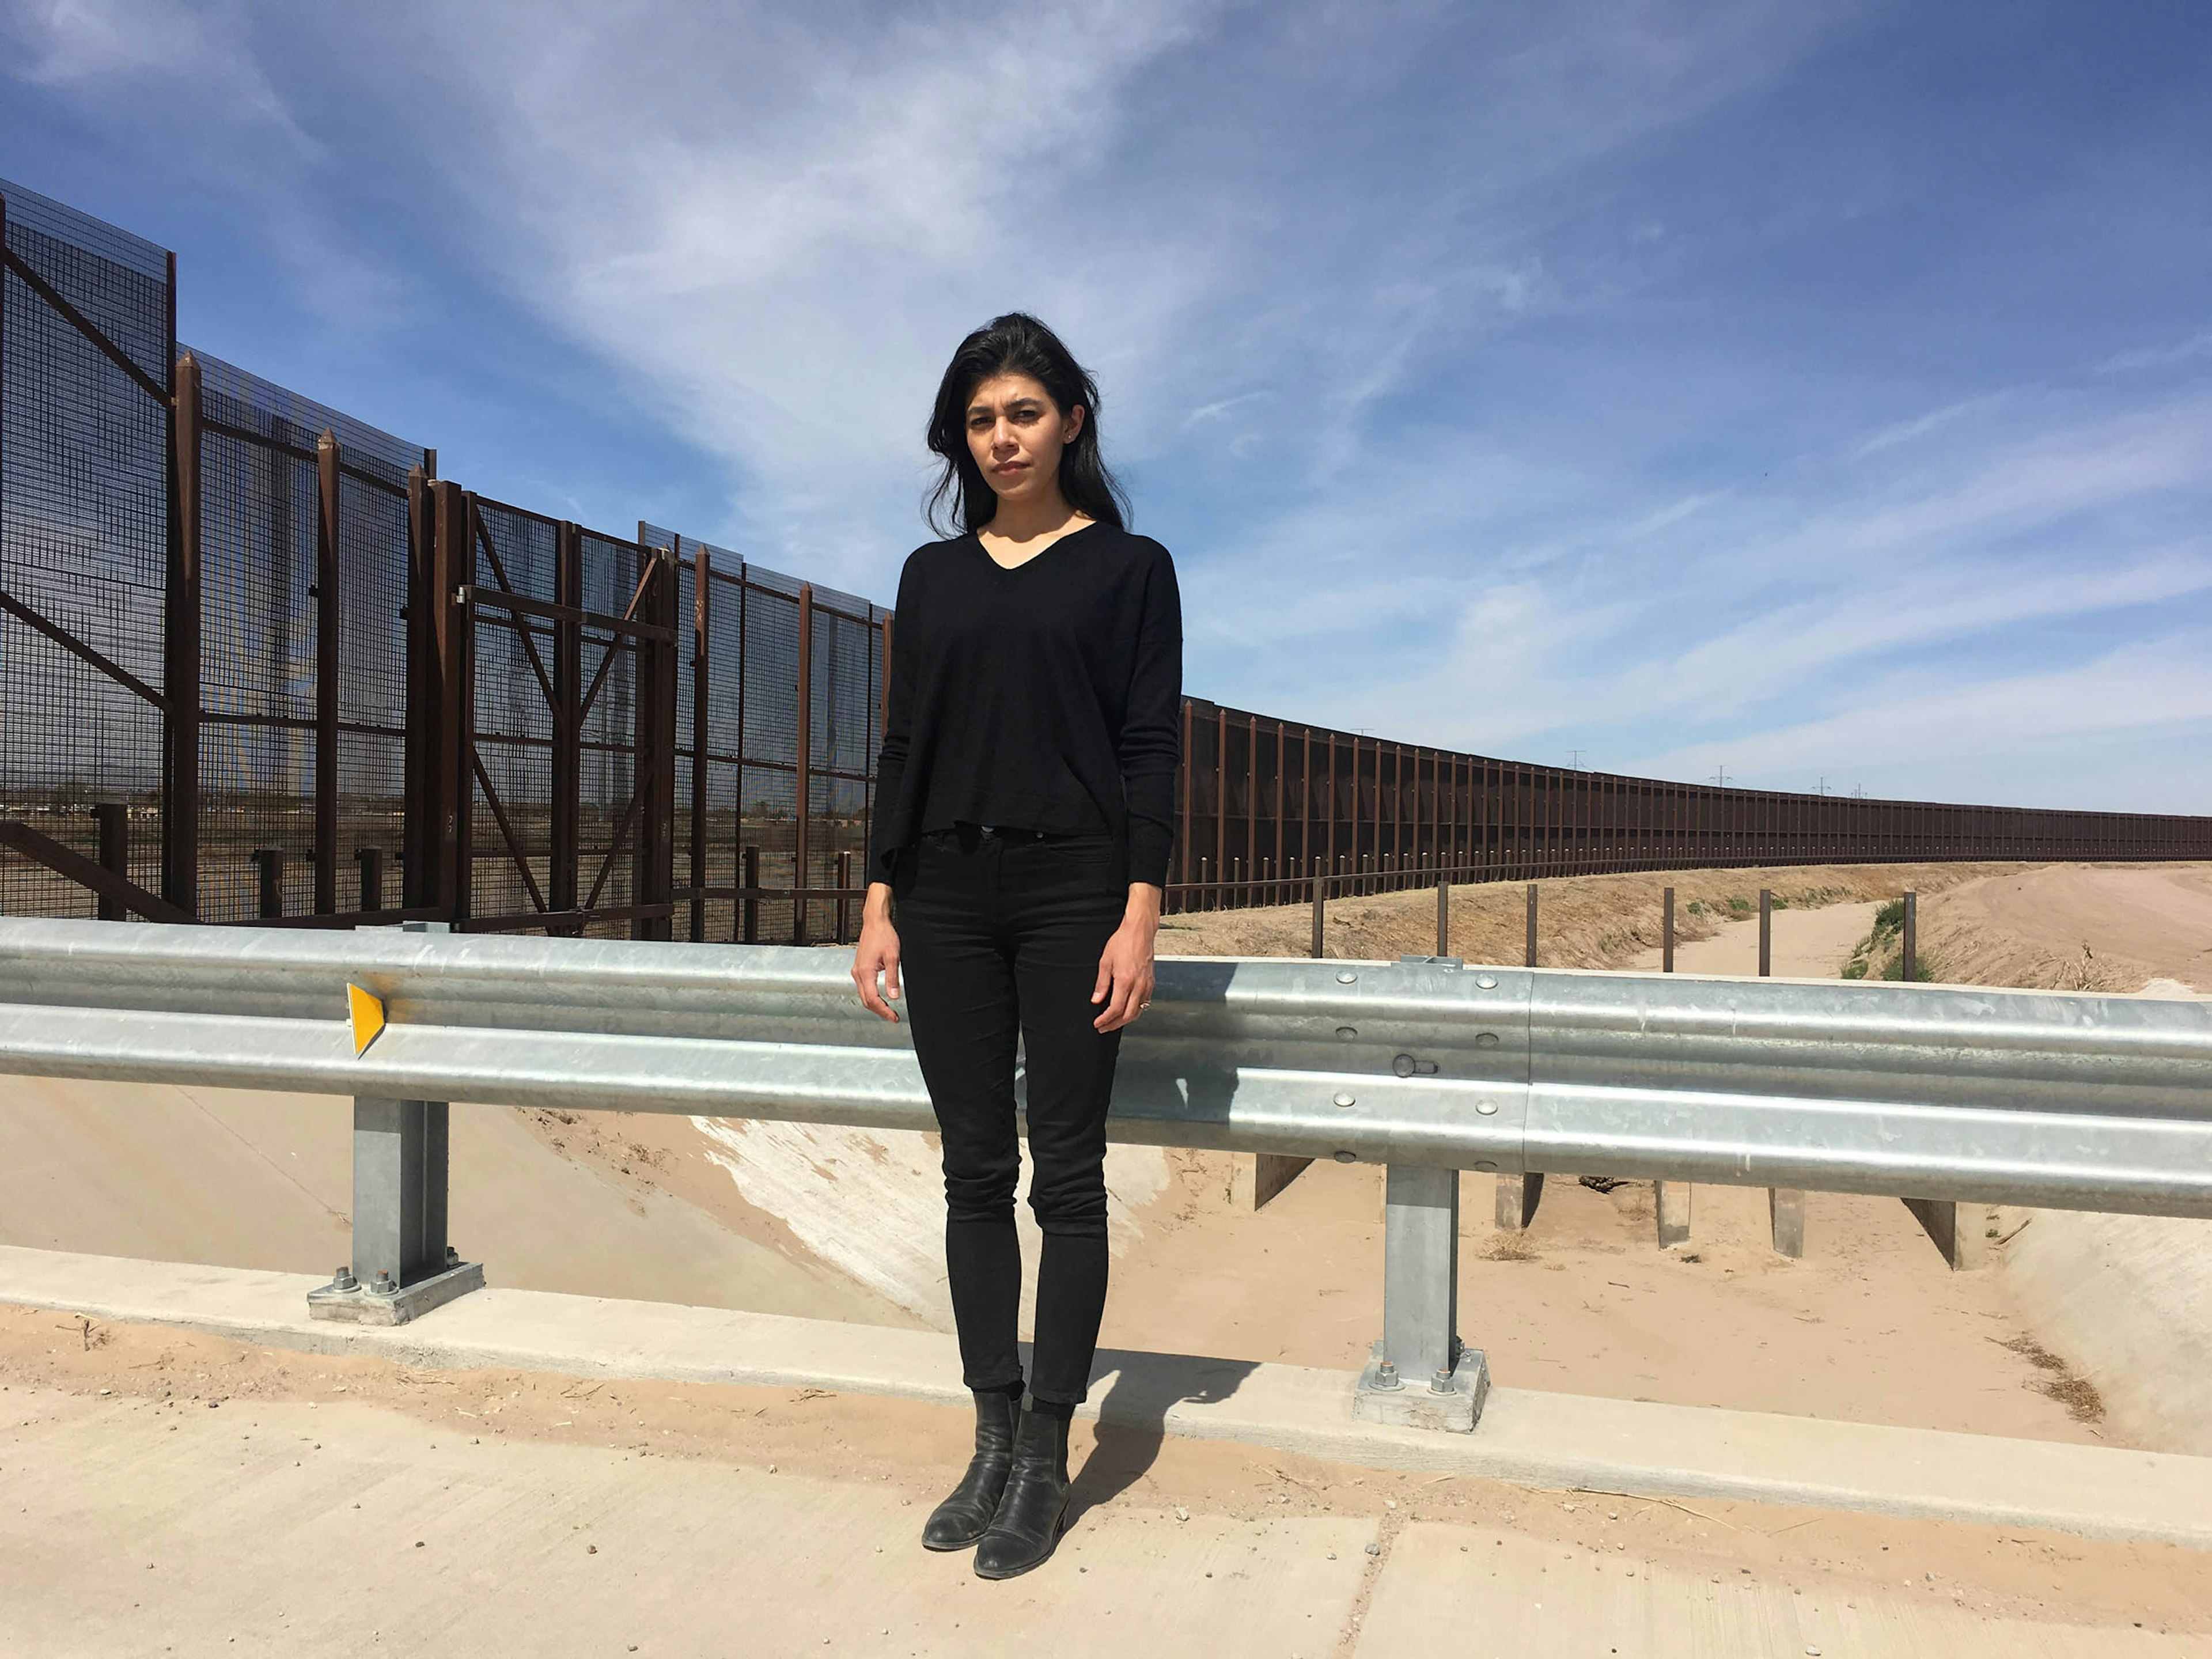 Adriana Corral on Producing a Counter Monument along the U.S.—Mexico Border